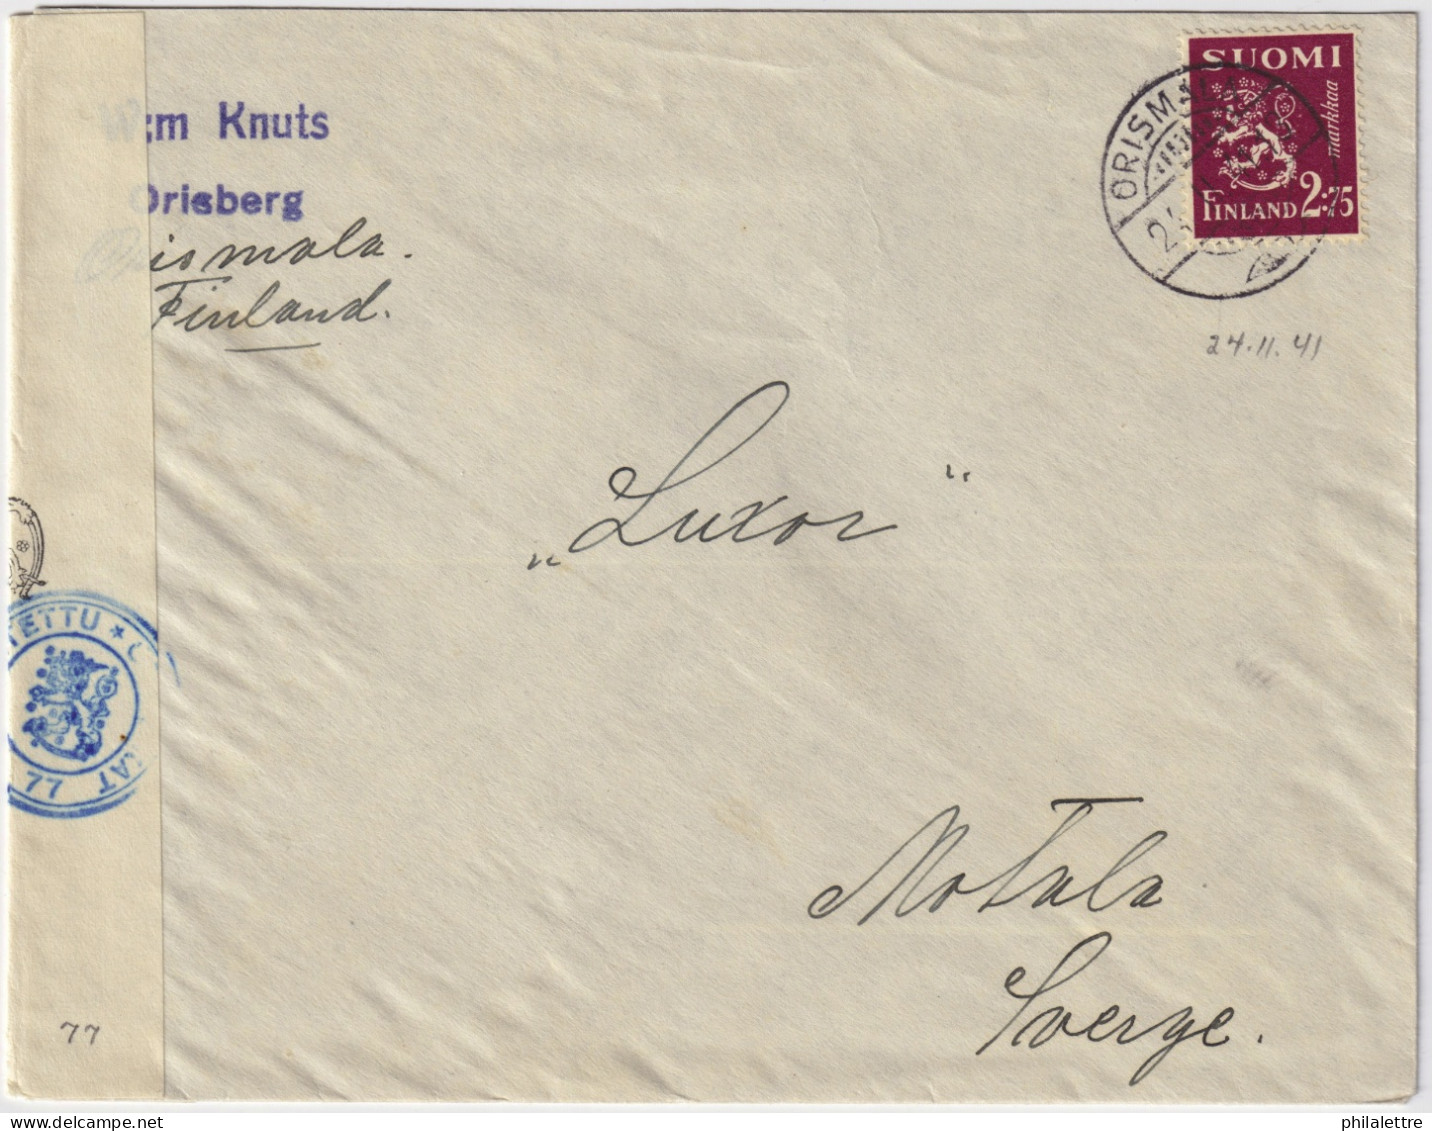 FINLAND - 1941 - Censored Cover From ORISMALA To Motala, Sweden Franked 2.75Mk - Covers & Documents